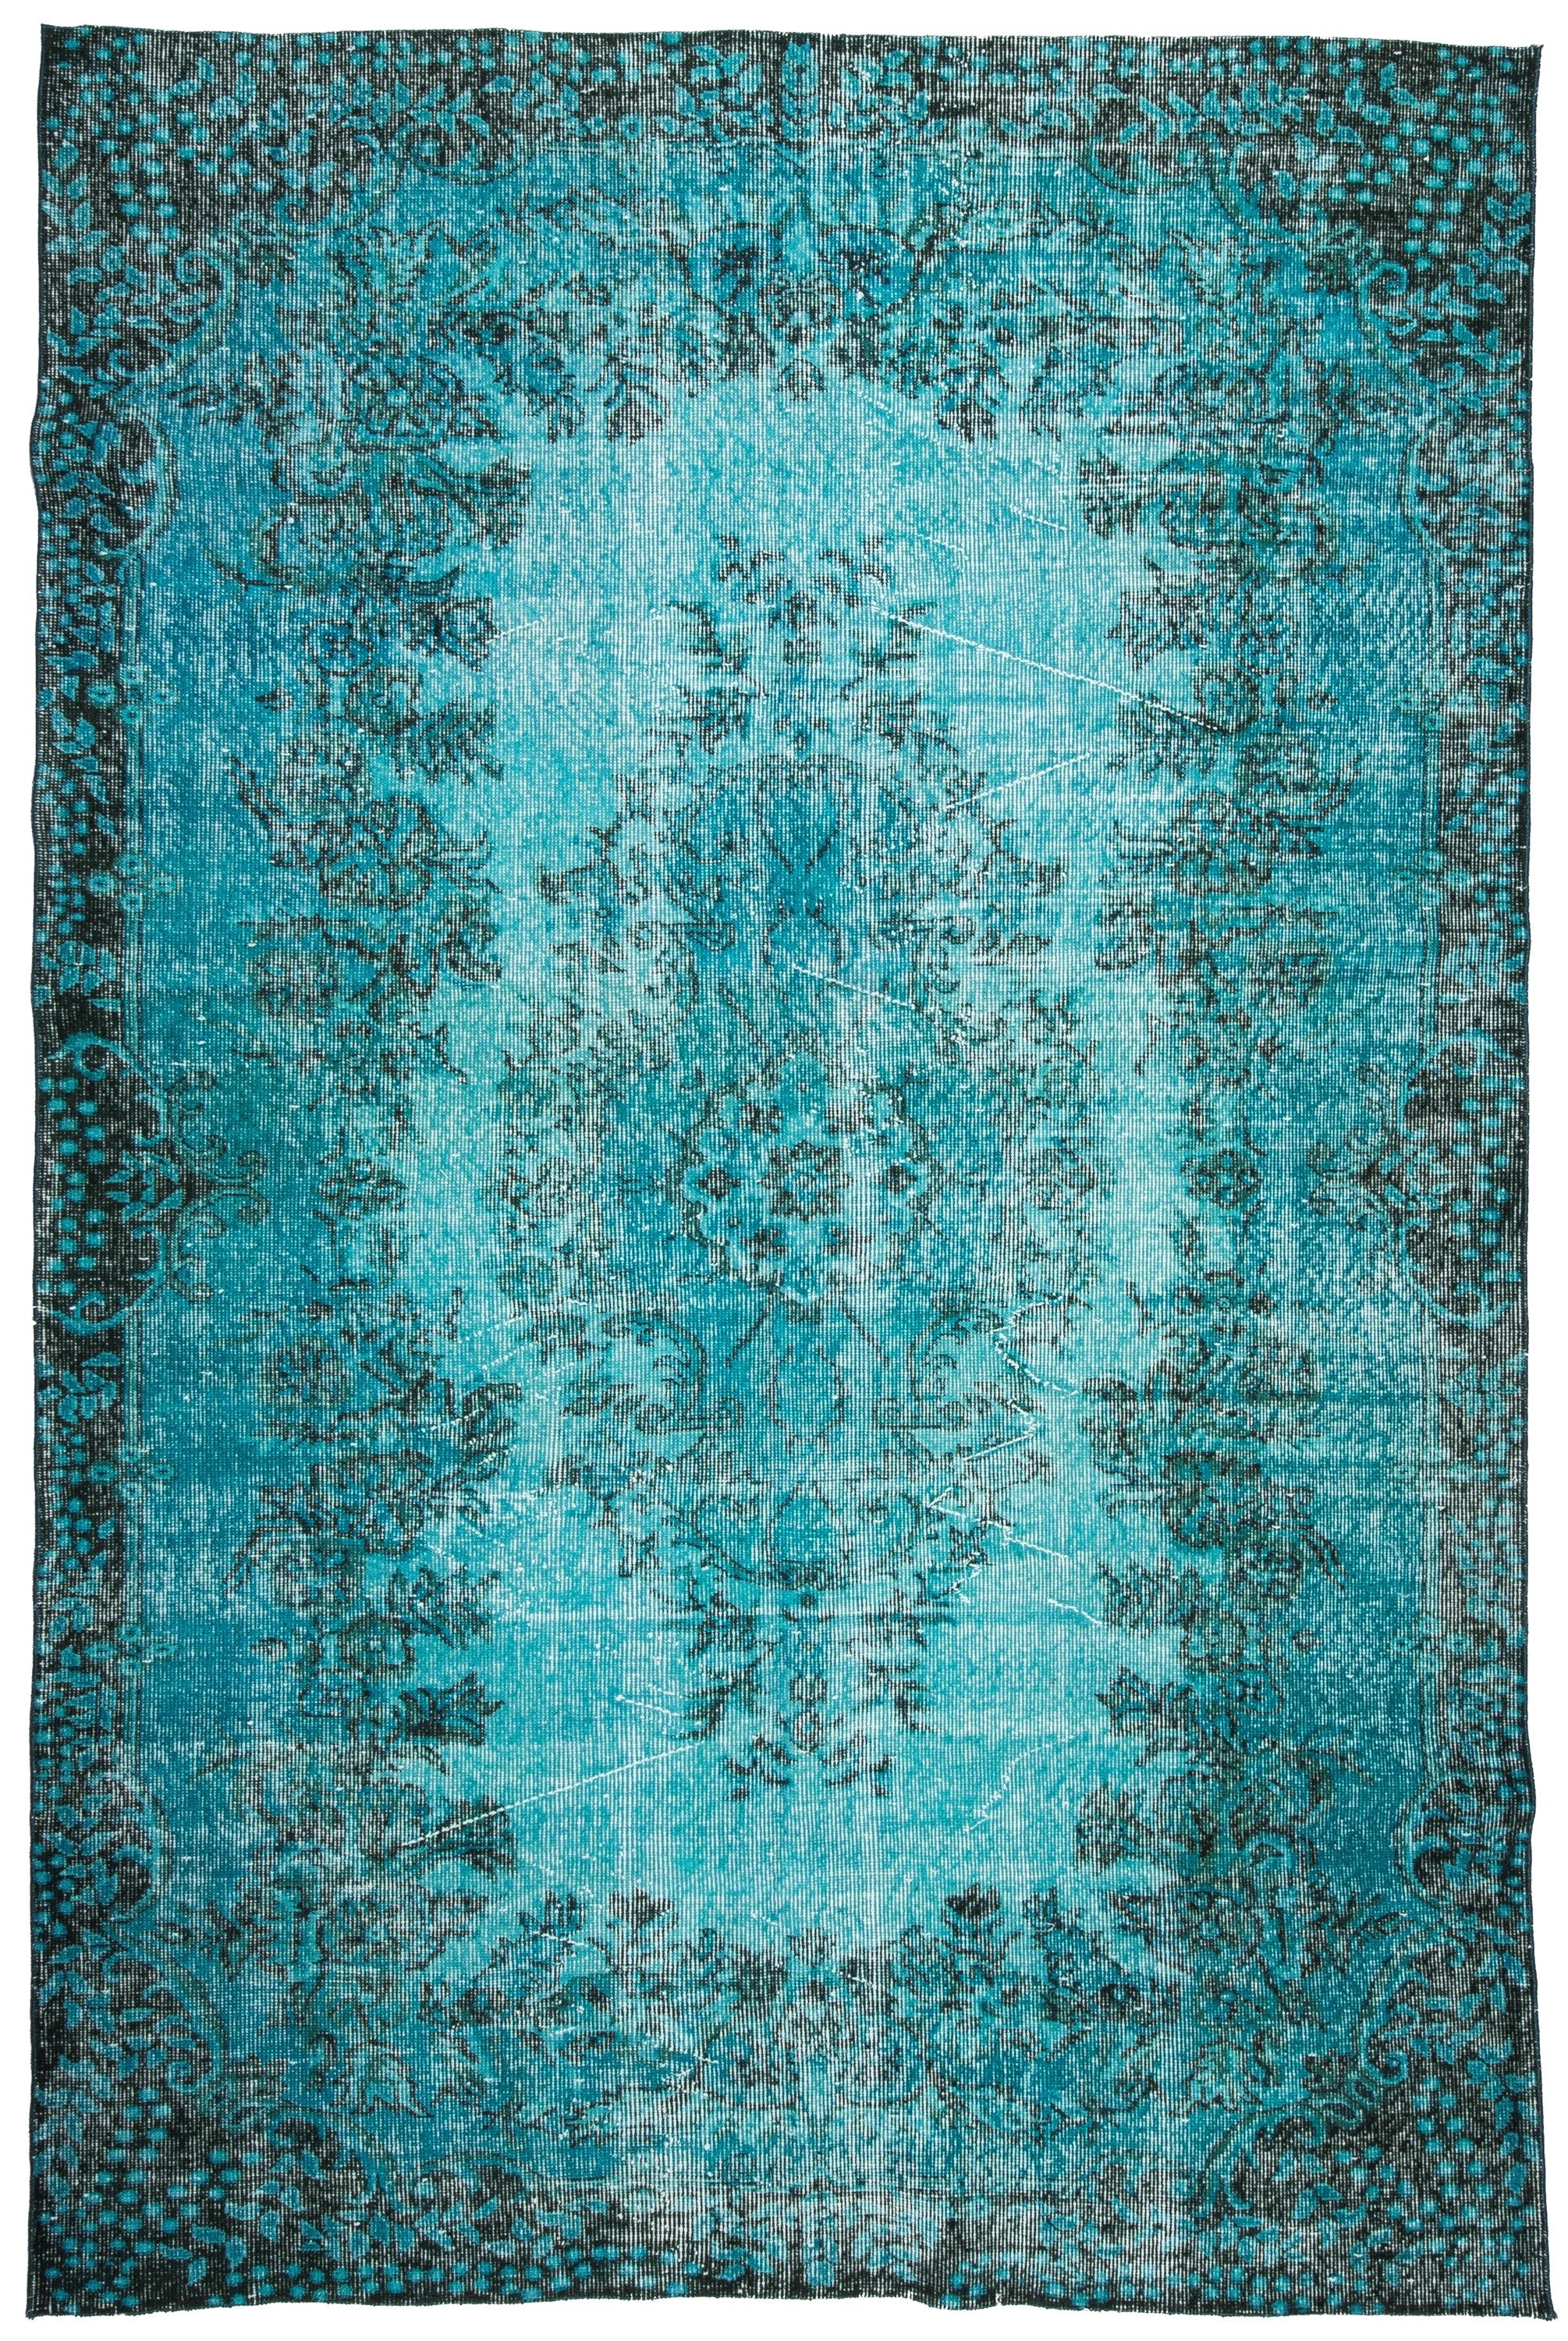 Overdyed Vintage Rug, Turquoise Blue Recycled Rug, Handmade Wool Bohemian Oriental Design Distressed Rug, Persian Area Rug,  8'10"x5'10"